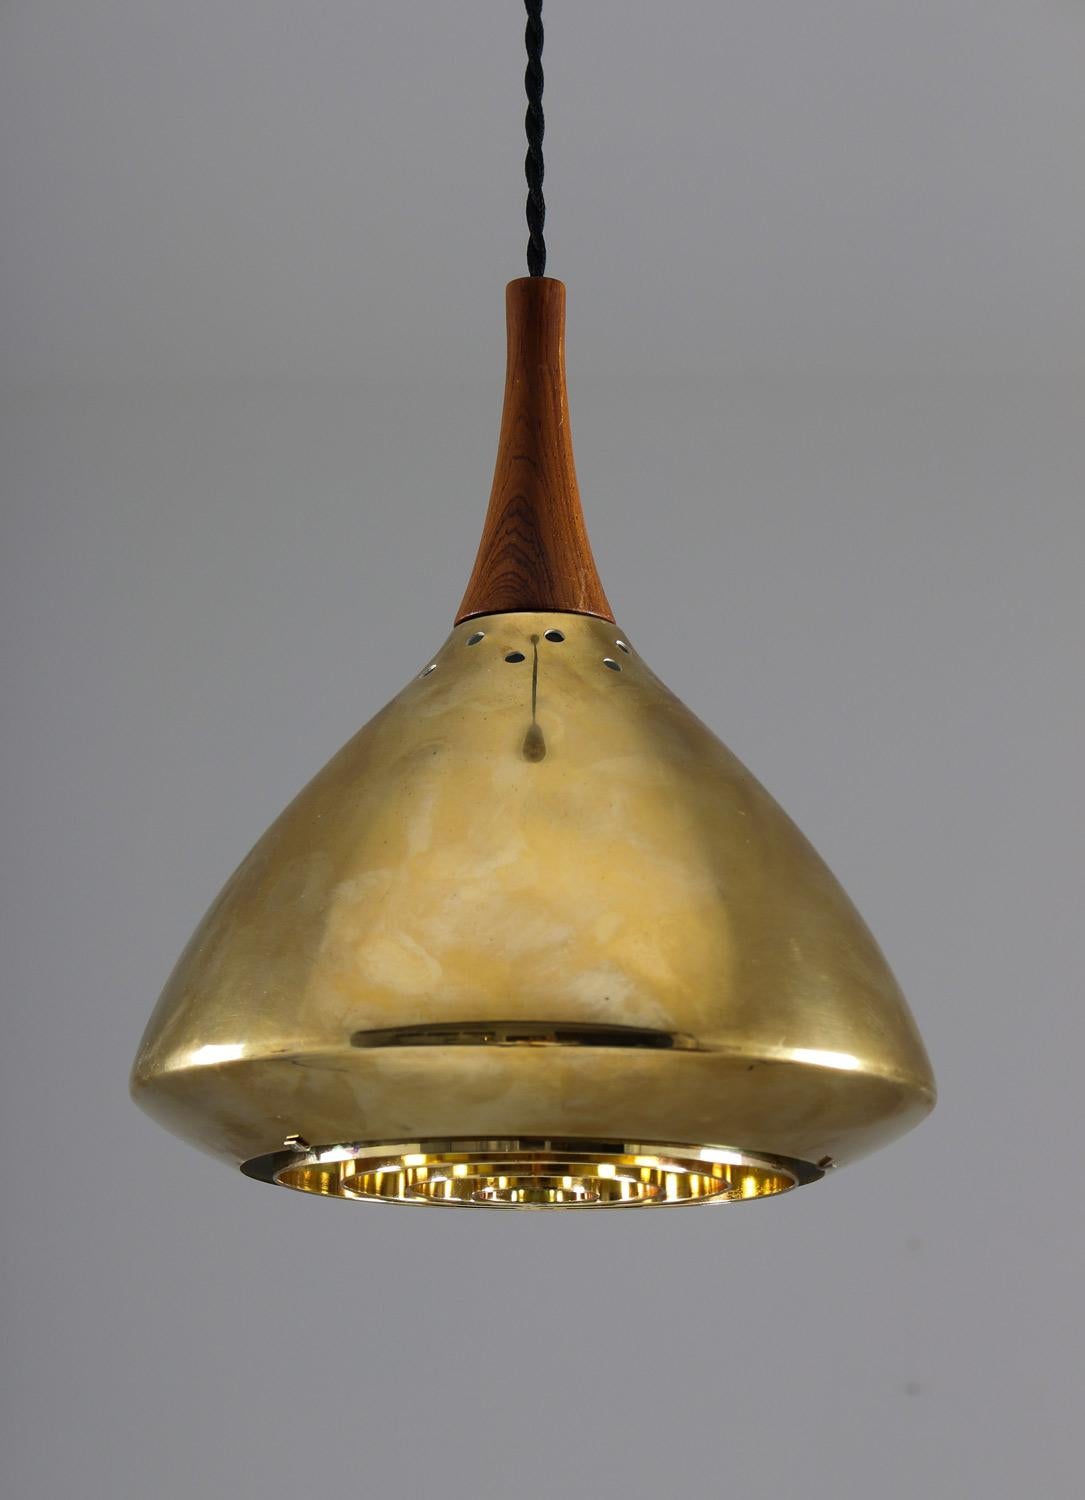 Swedish Pendant in Rosewood and Perforated Brass by Falkenberg In Good Condition For Sale In Karlstad, SE